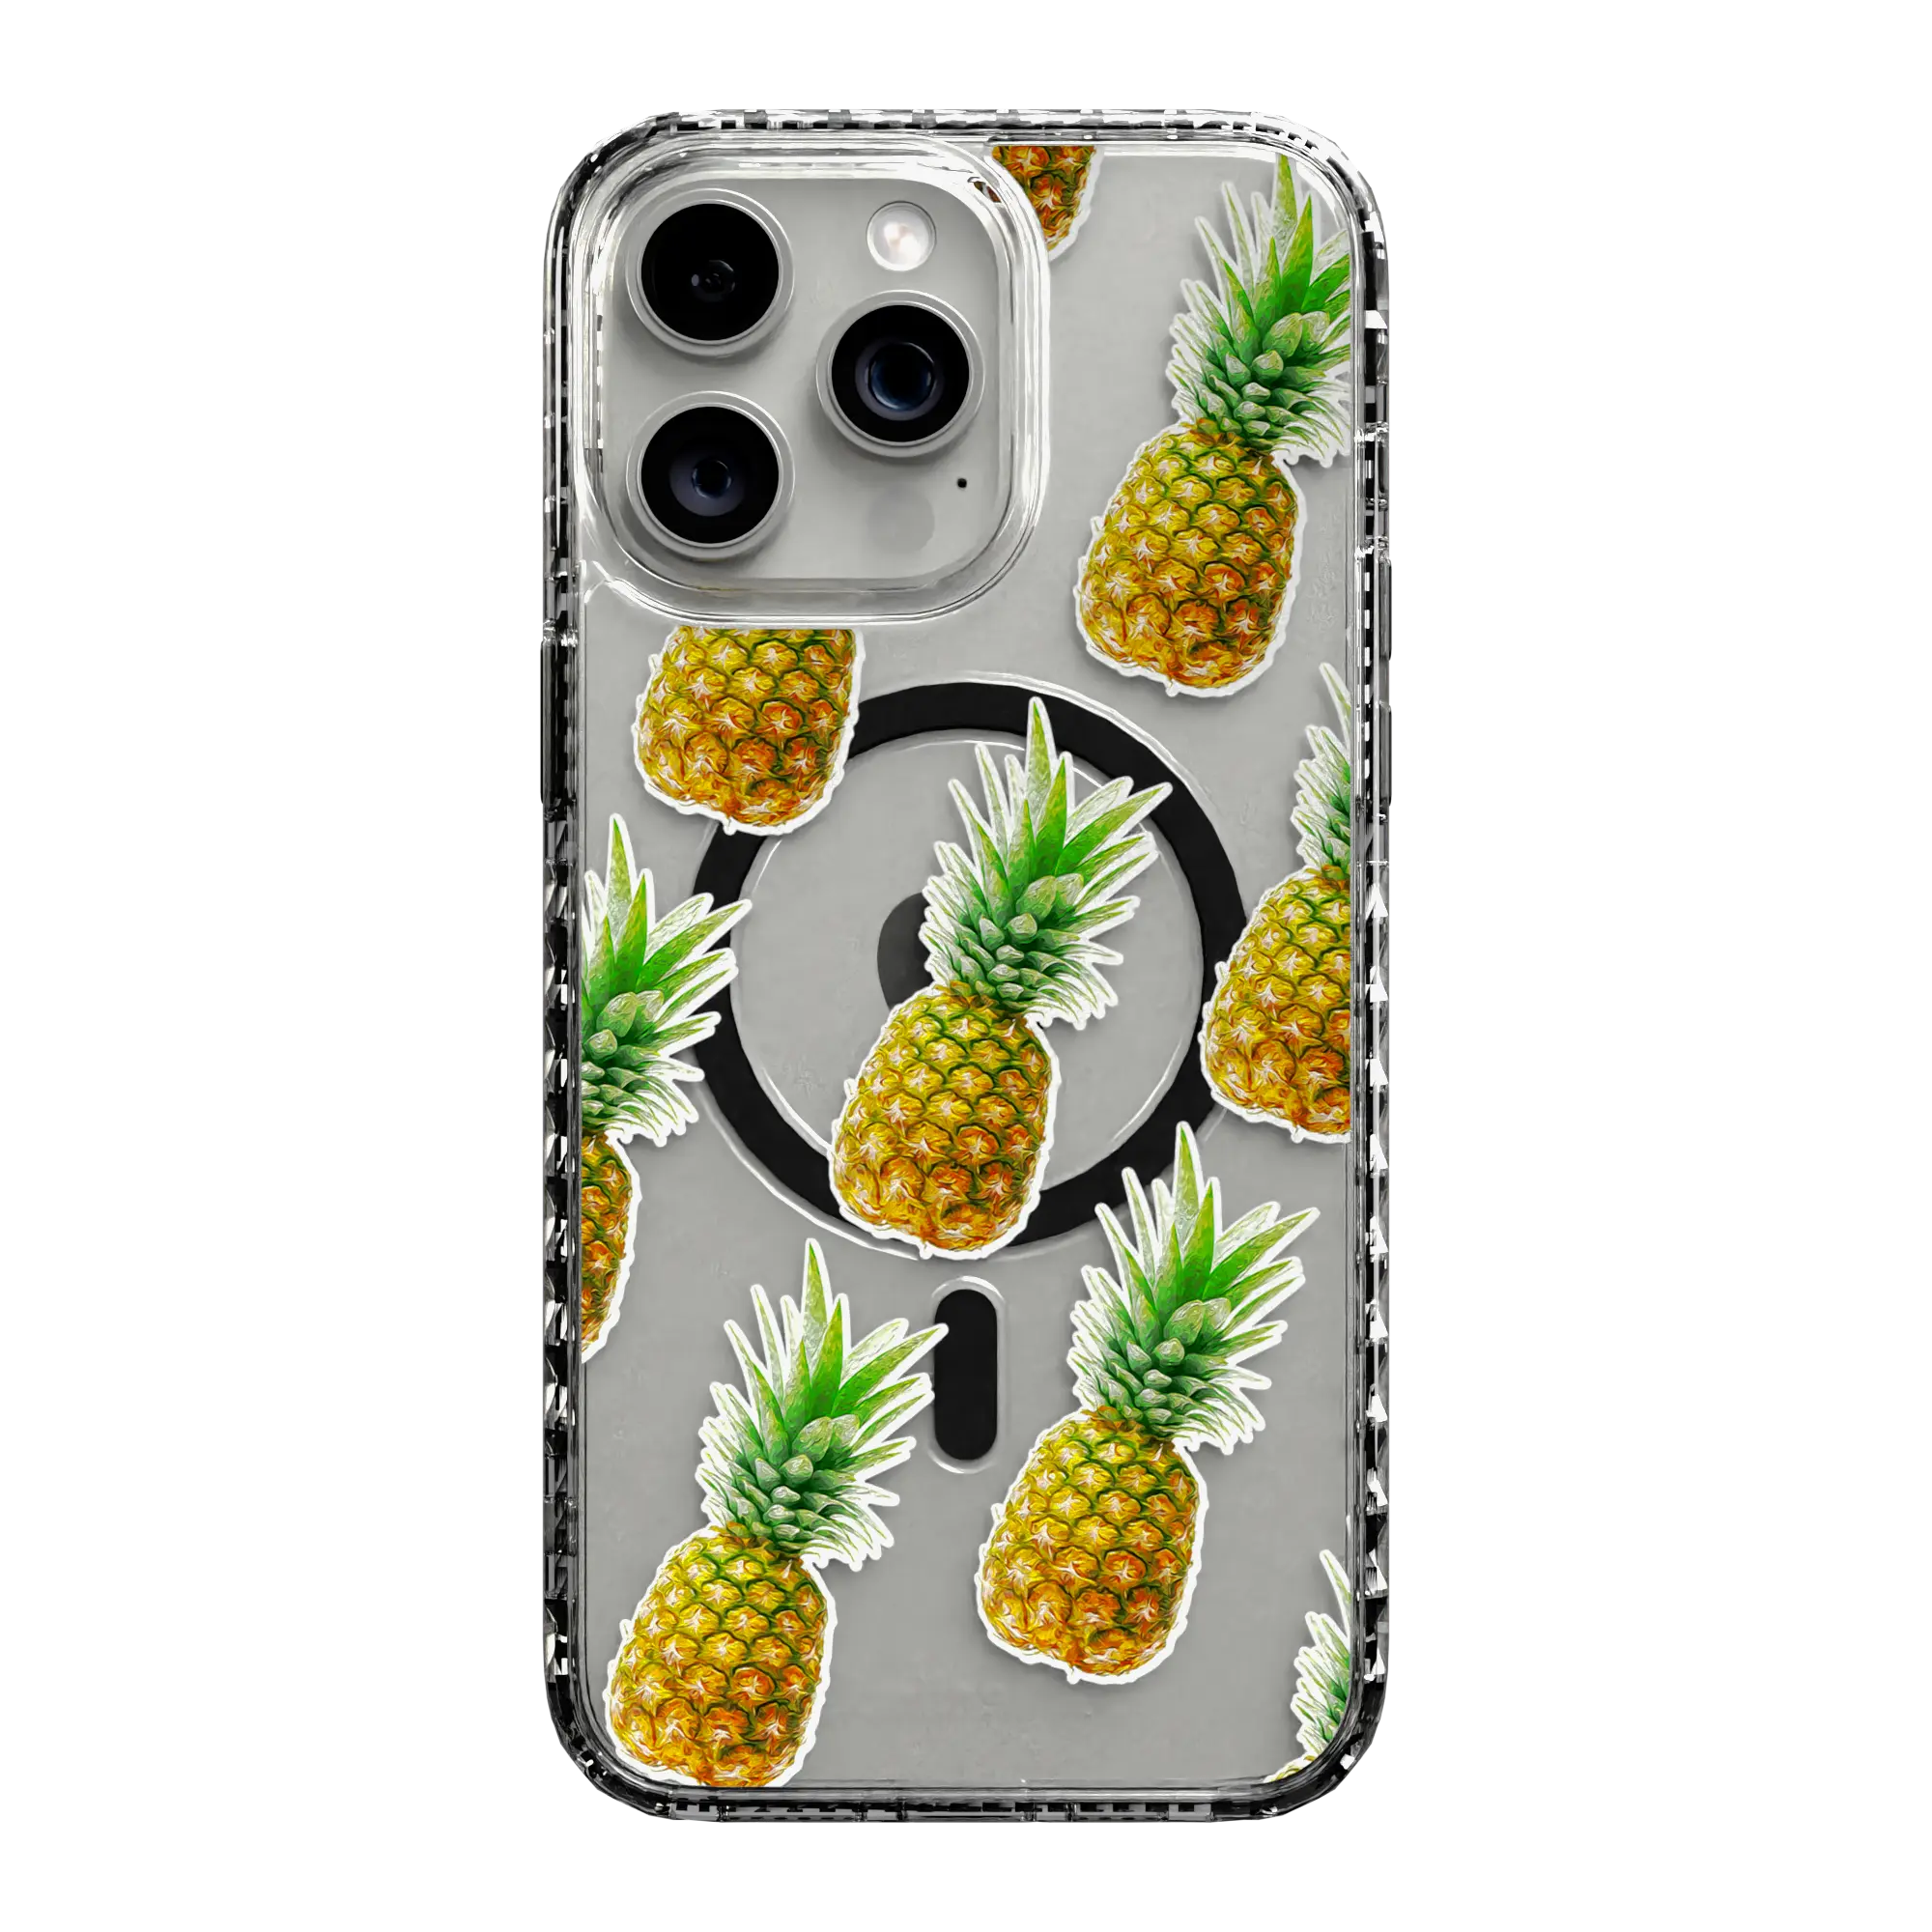 Apple-iPhone-14-Pro-Max-Crystal-Clear Pineapple Splash | Protective MagSafe Case | Fruits Collection for Apple iPhone 14 Series cellhelmet cellhelmet